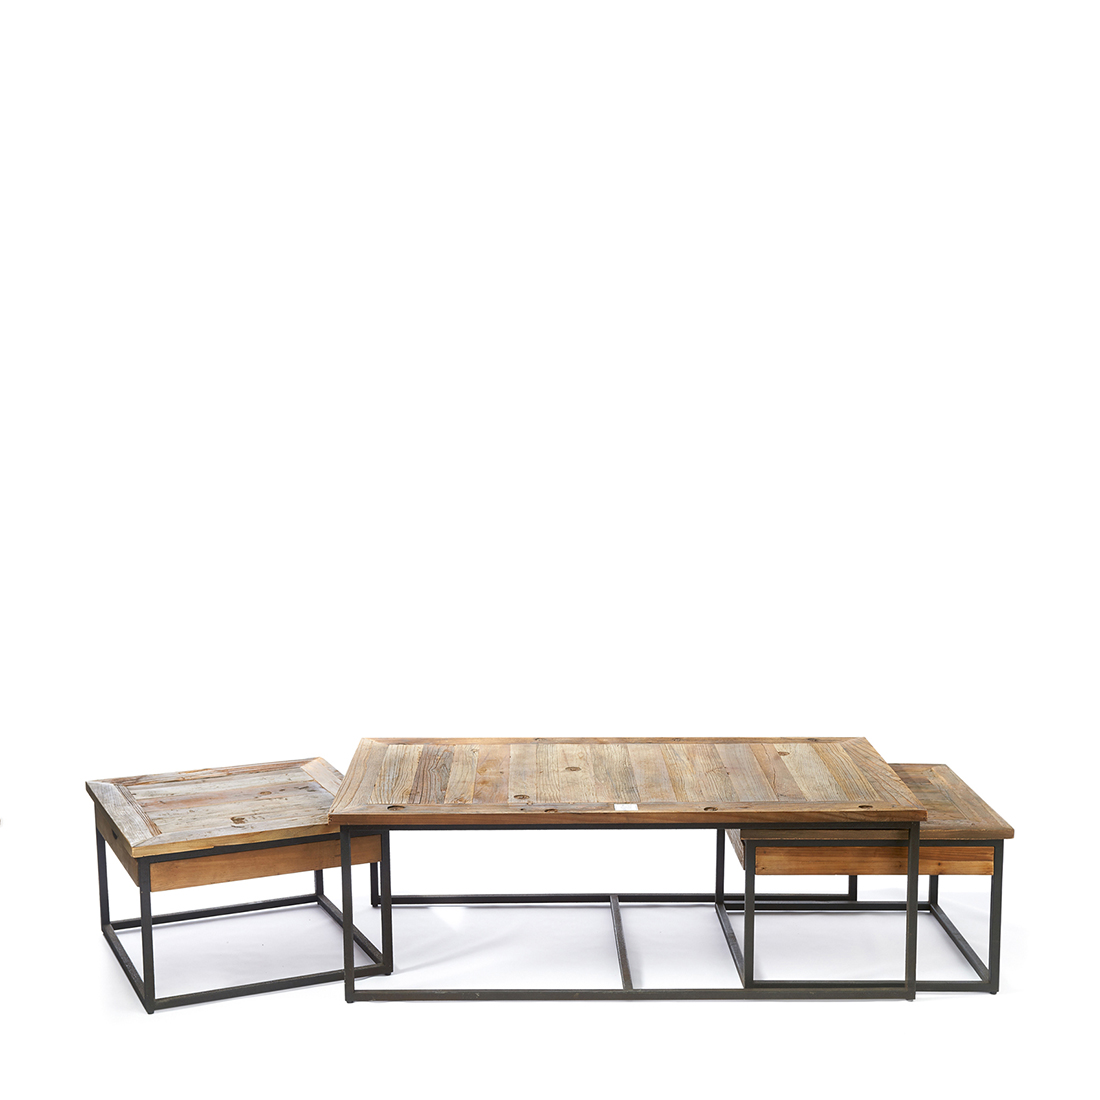 Shelter Island Coffee Table S/3